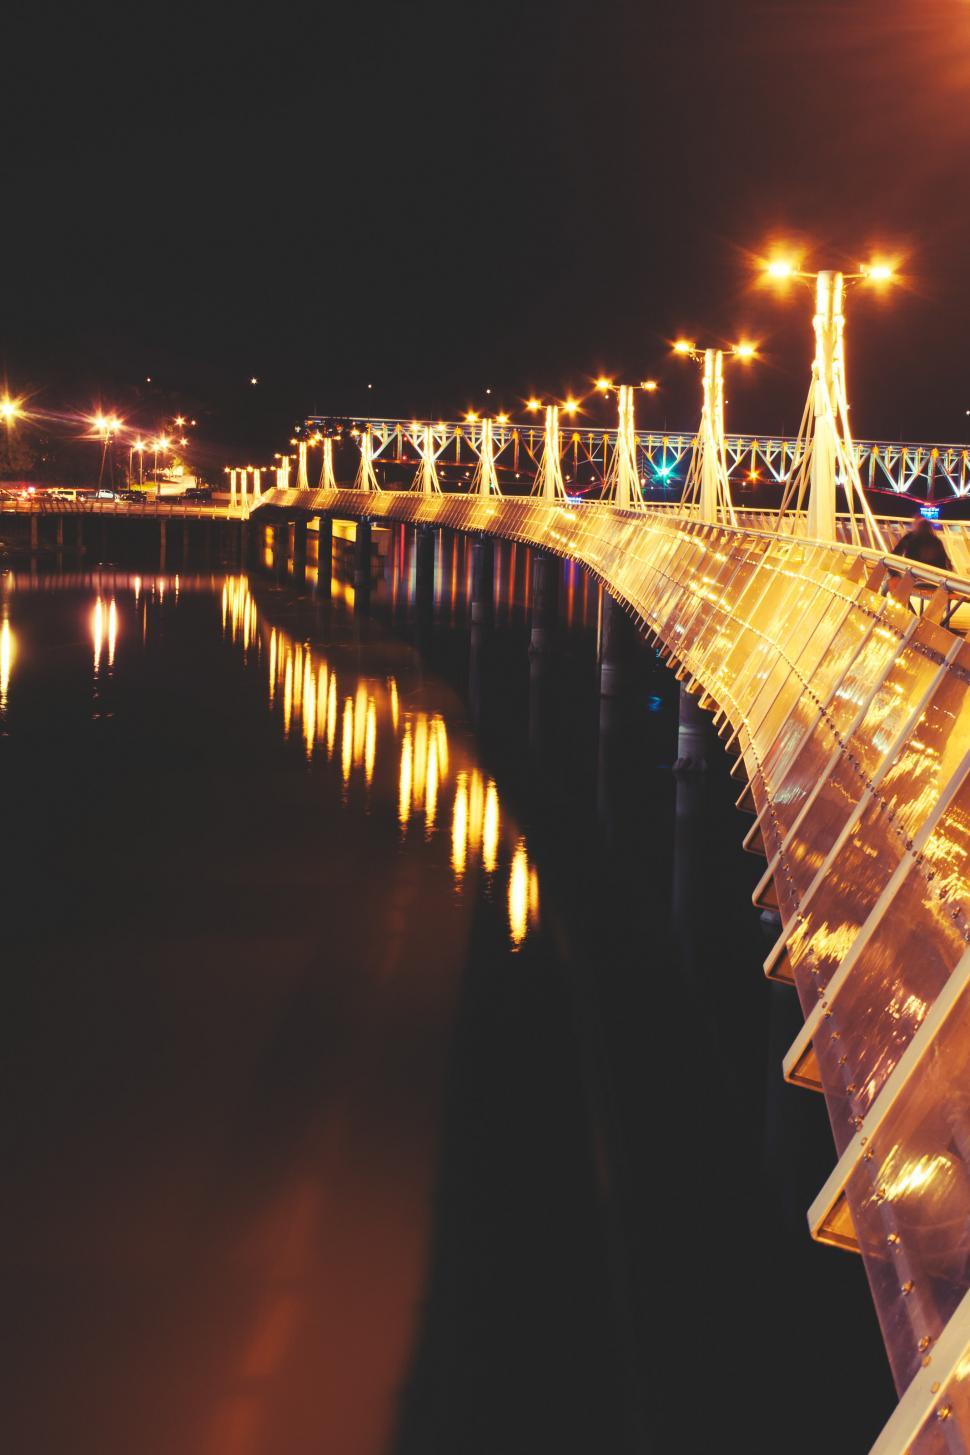 Free Image of A Bridge Over a Body of Water at Night 